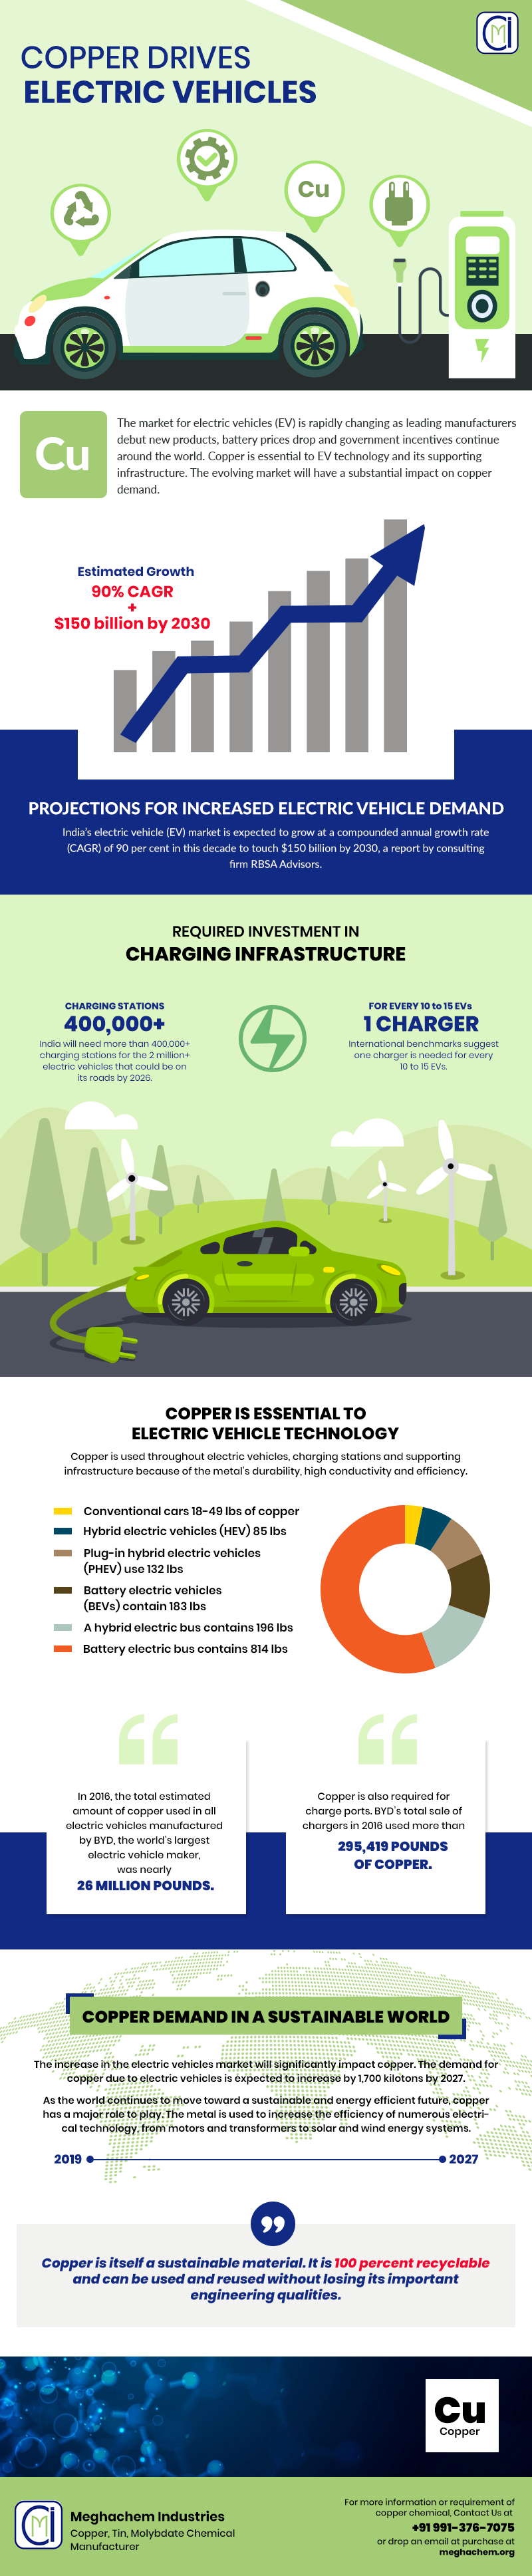 How Copper Drives Electric Vehicles?